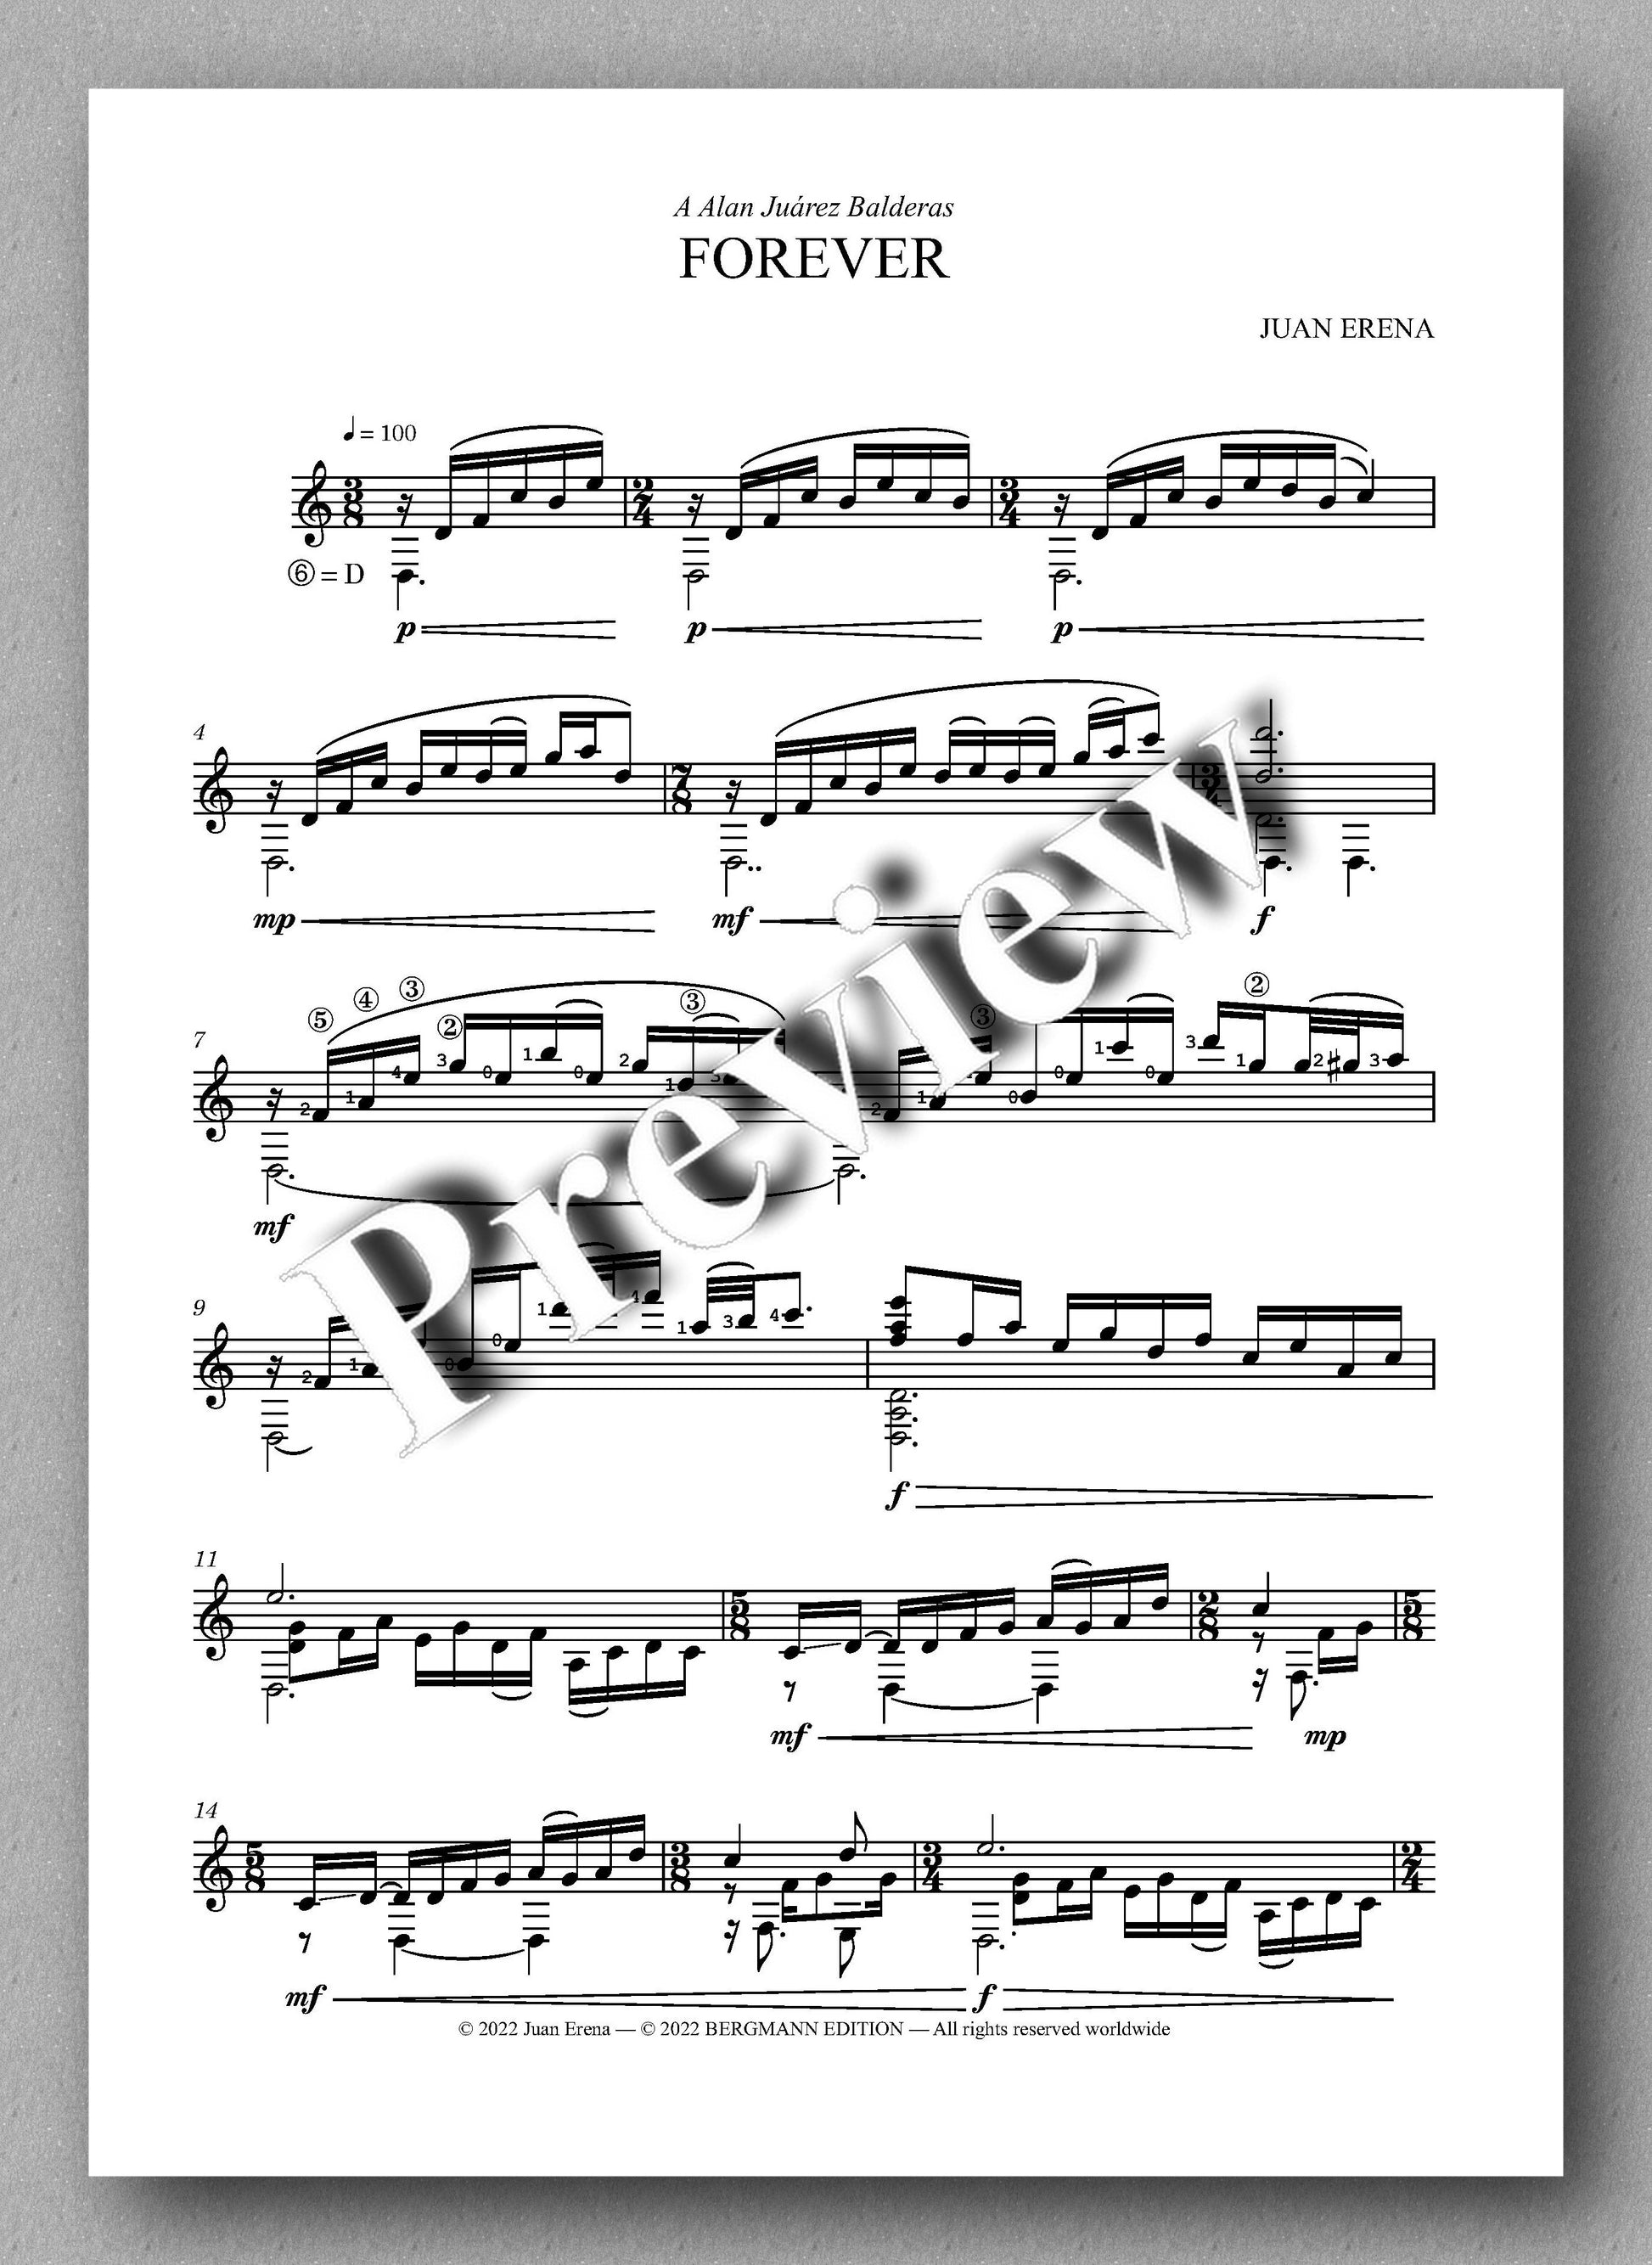 Juan Erena, Forever - preview of the music score 1